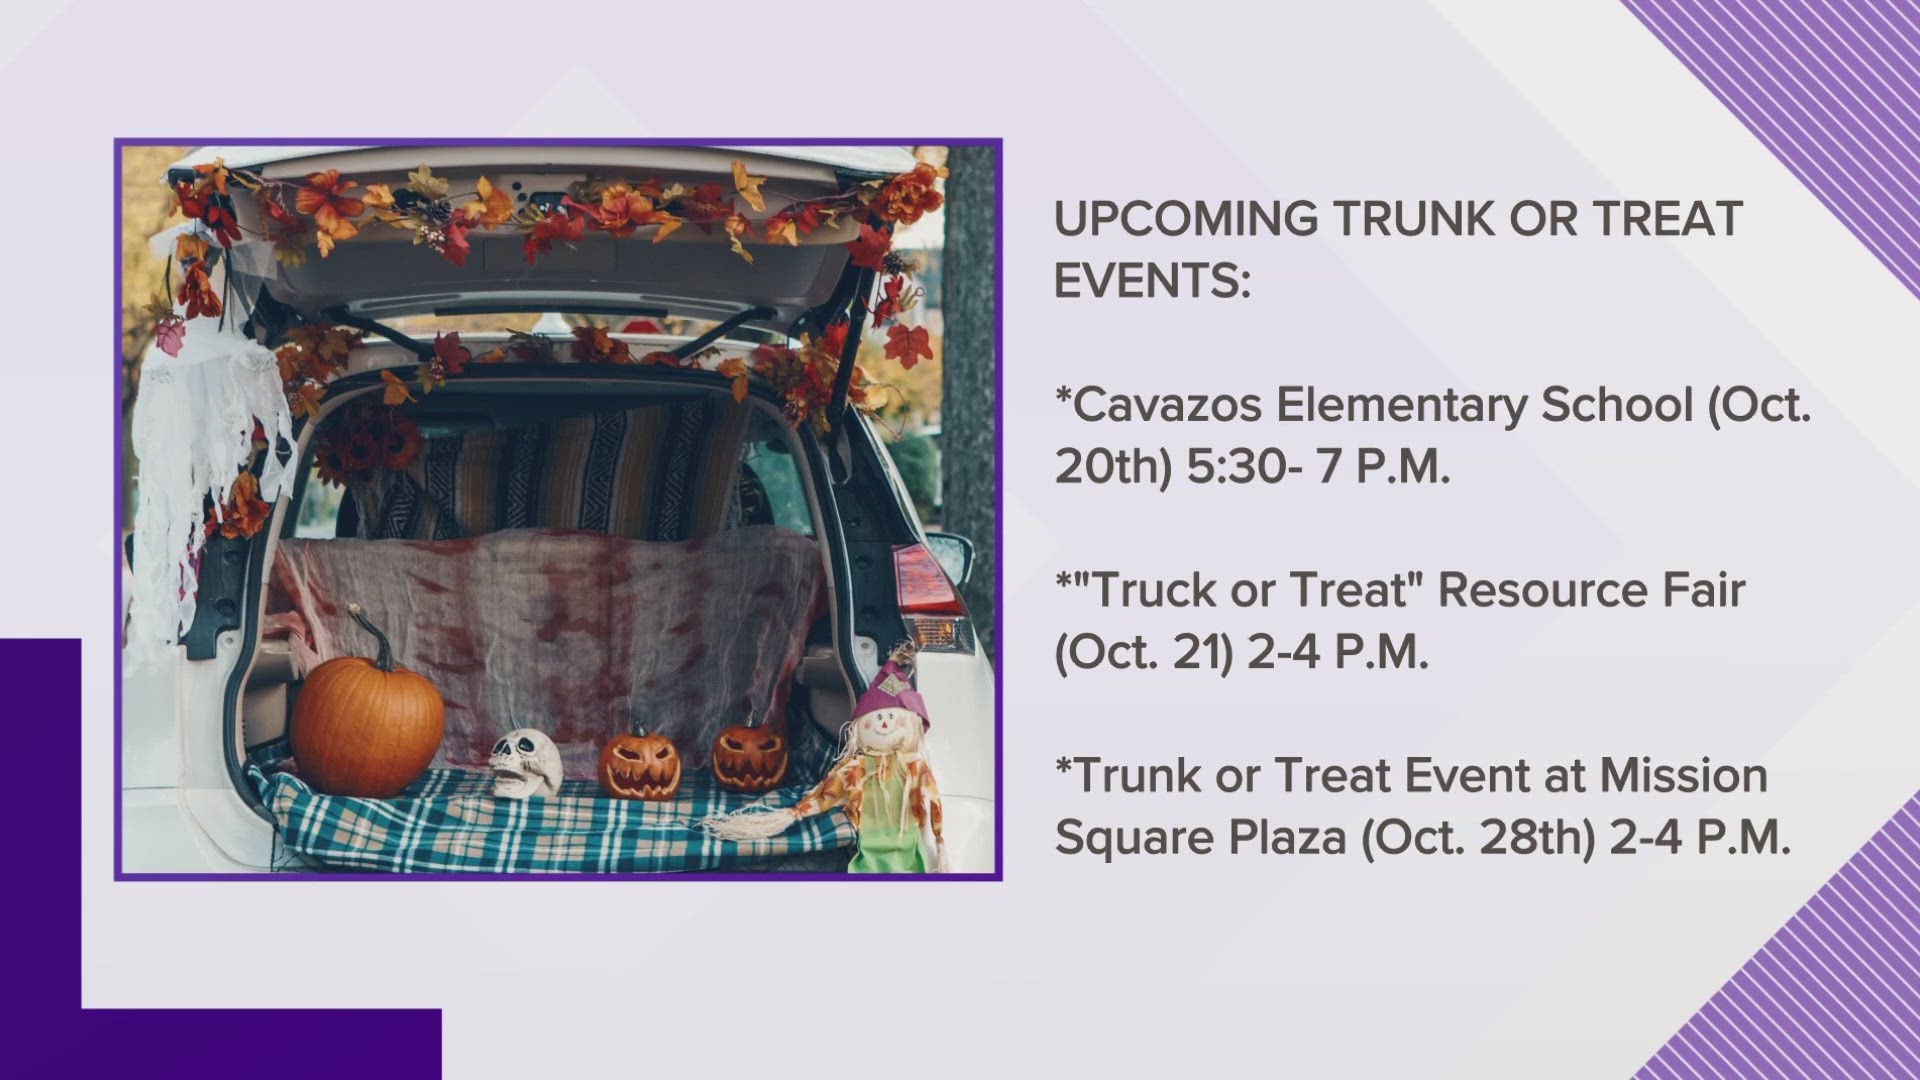 Here are some of the Trunk or Treats that are happening during the month of October.